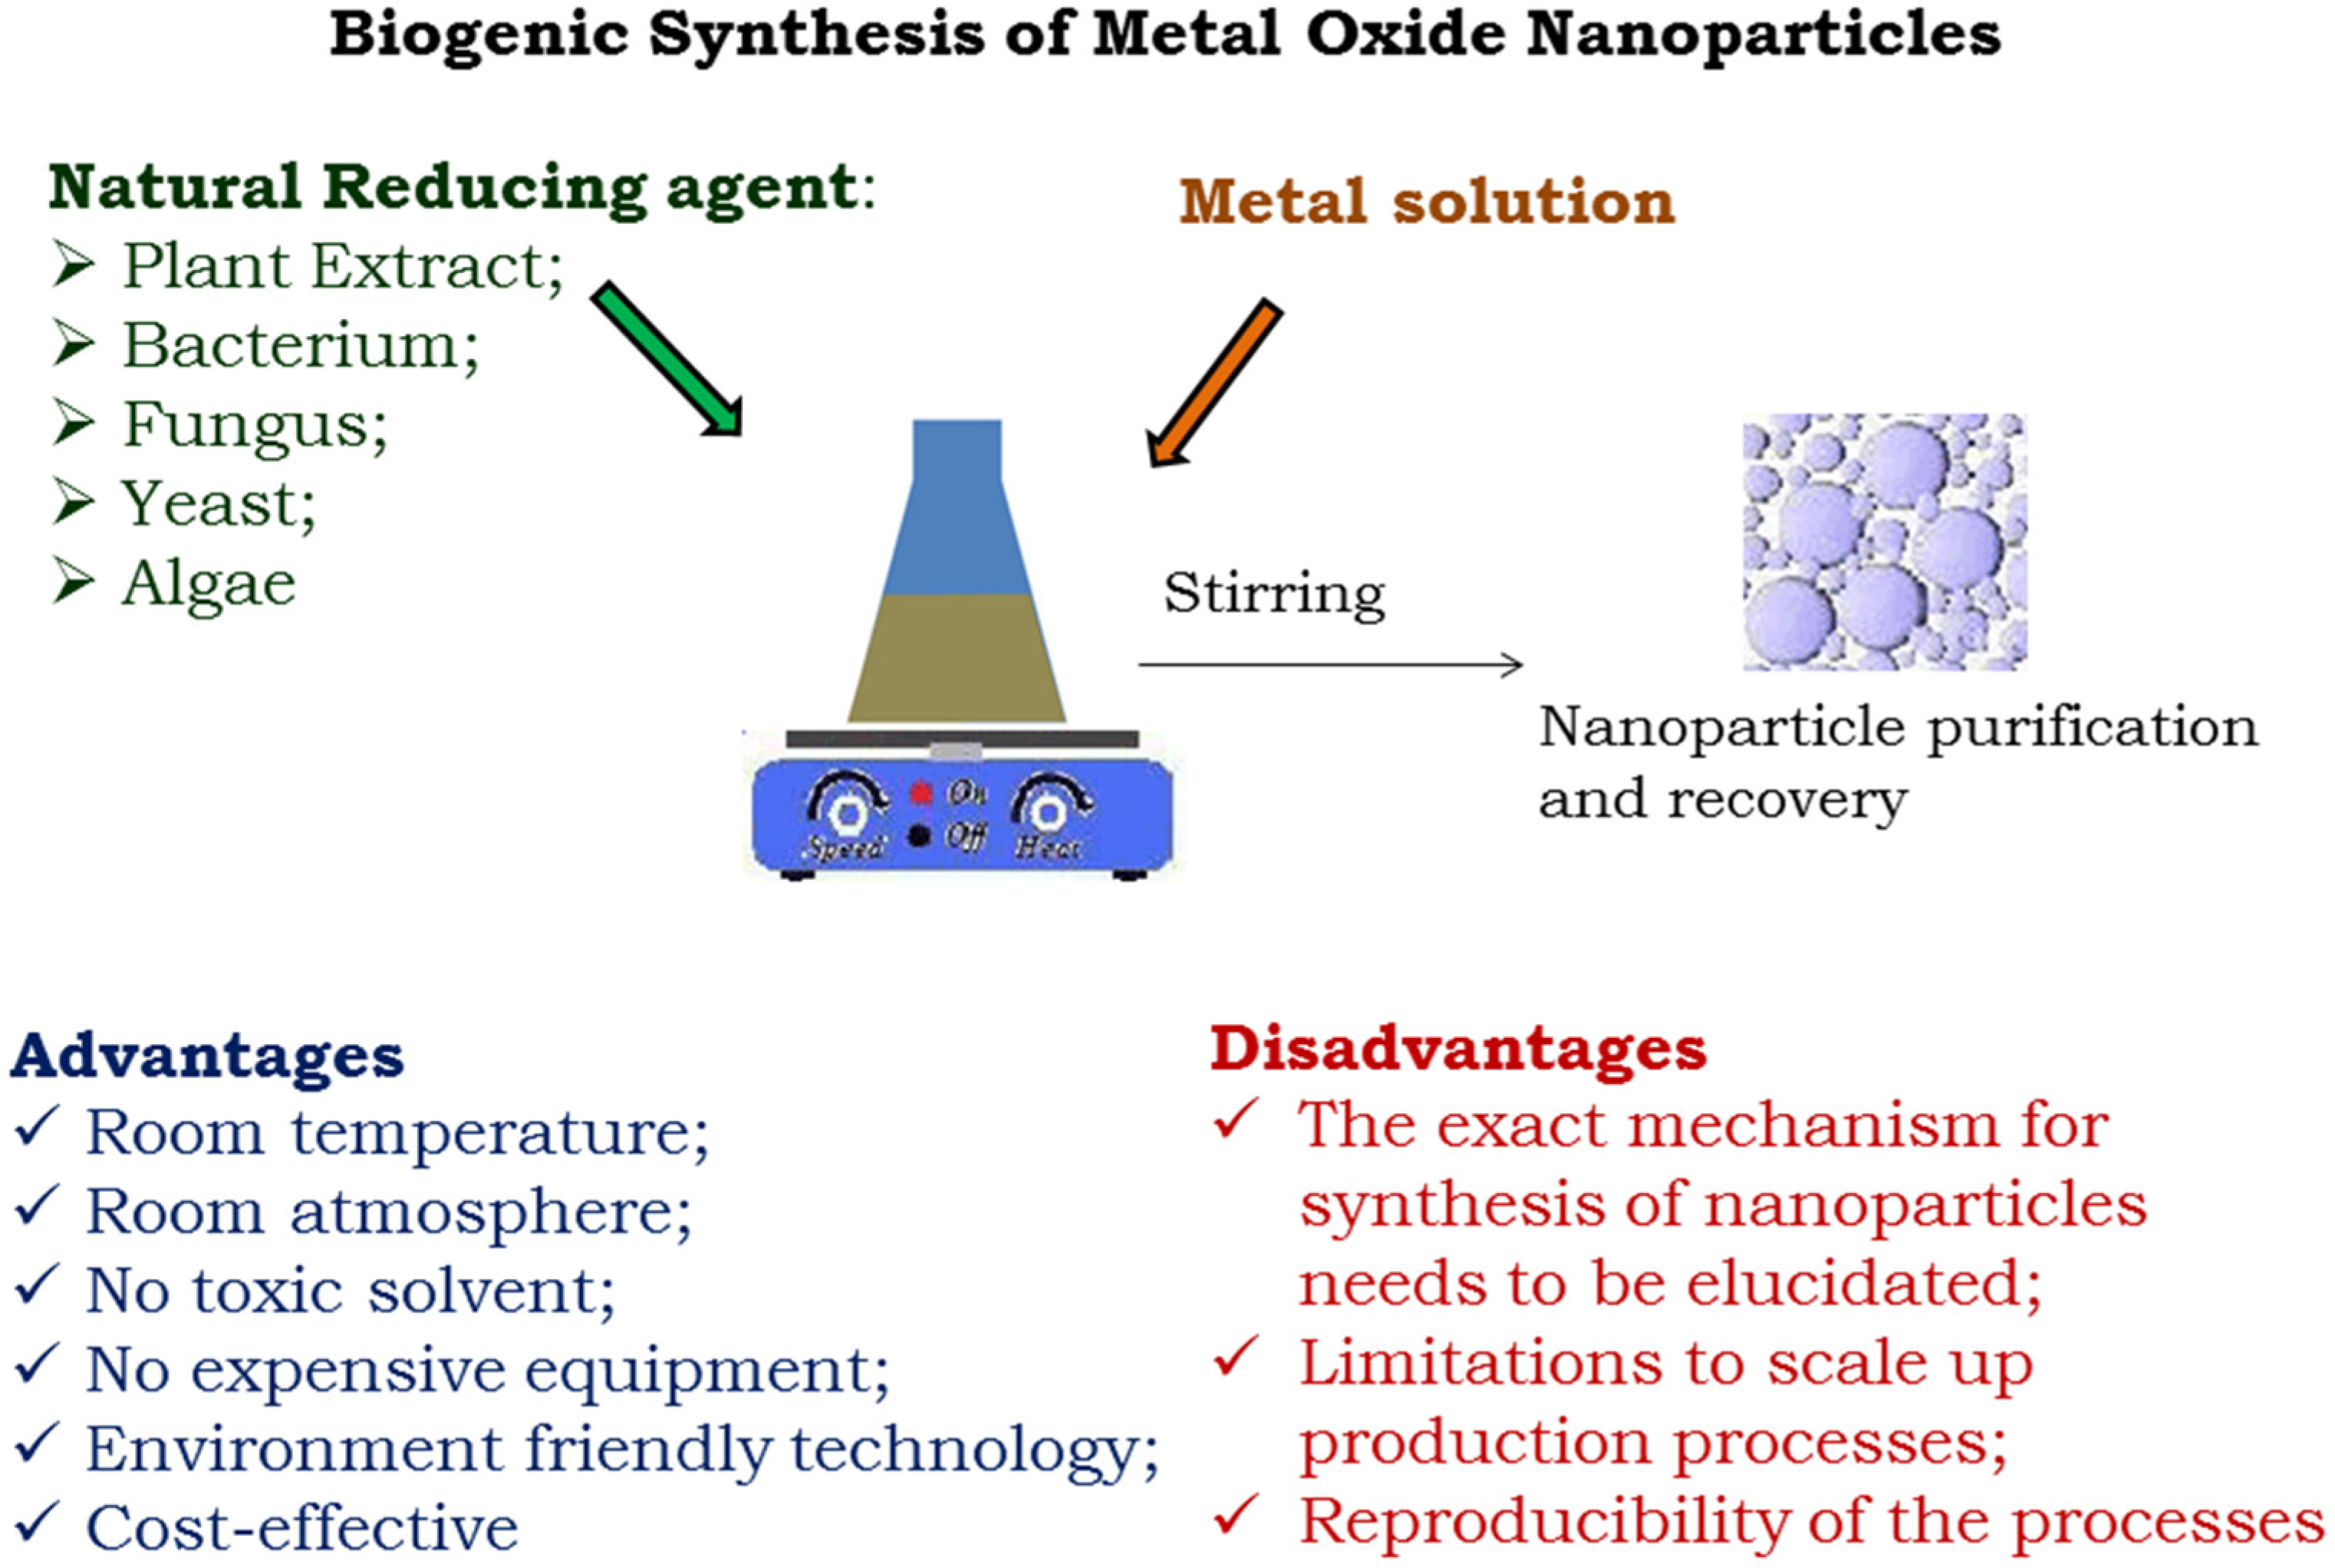 Метал синтез. Synthesis of Nanoparticles. Metal Oxide Nanoparticles. Metal oxidation. Disadvantages of the Metals.